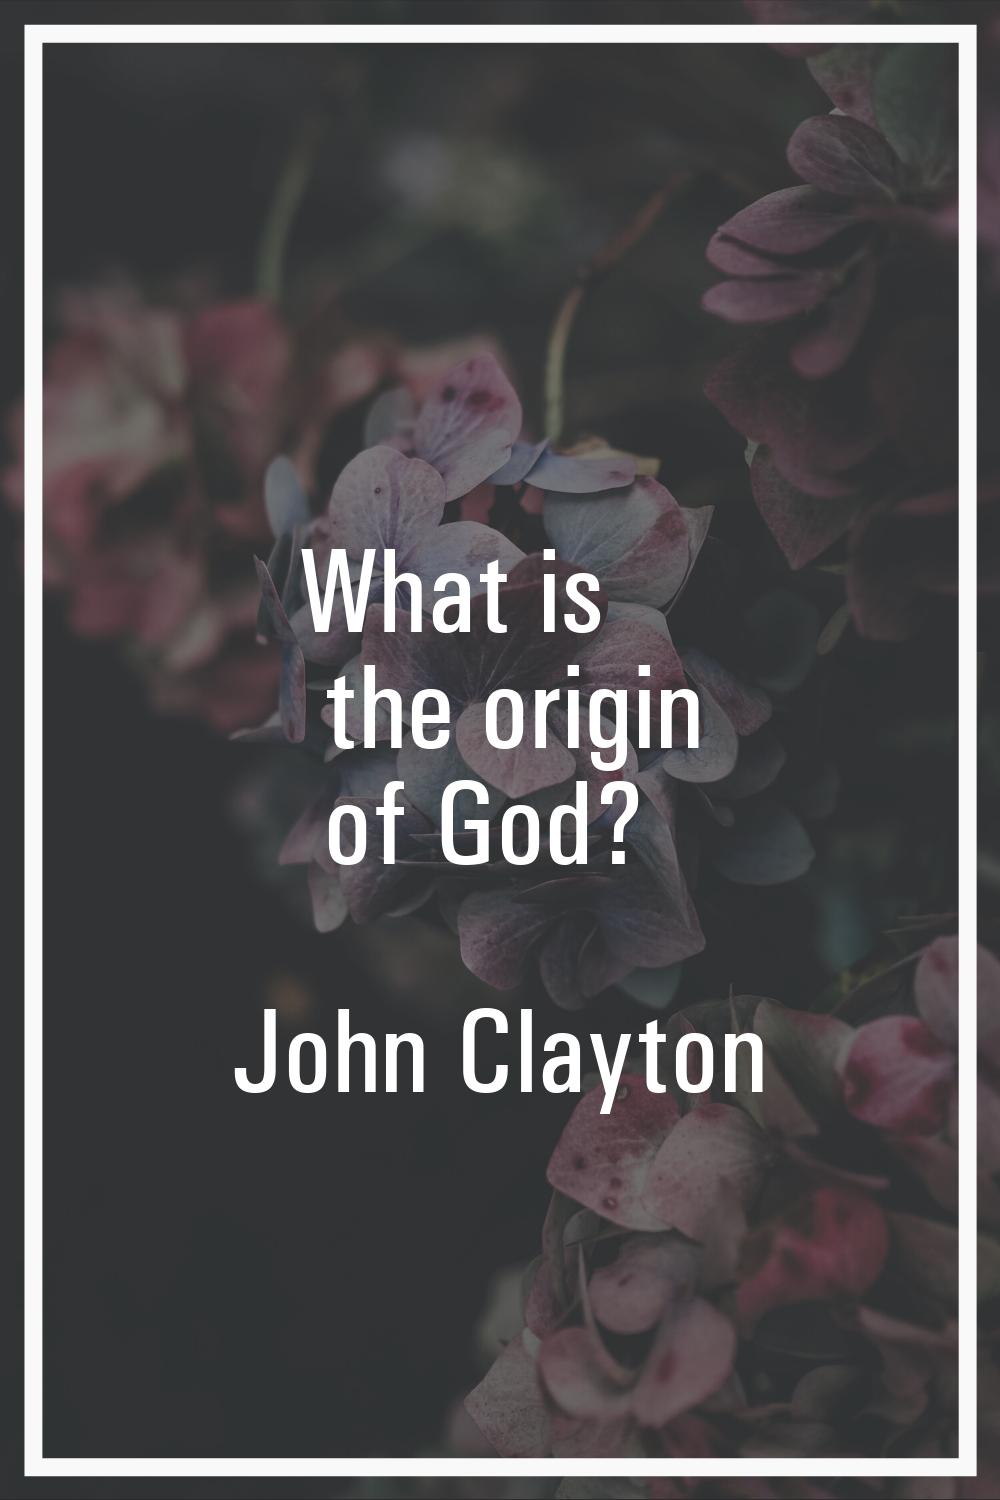 What is the origin of God?